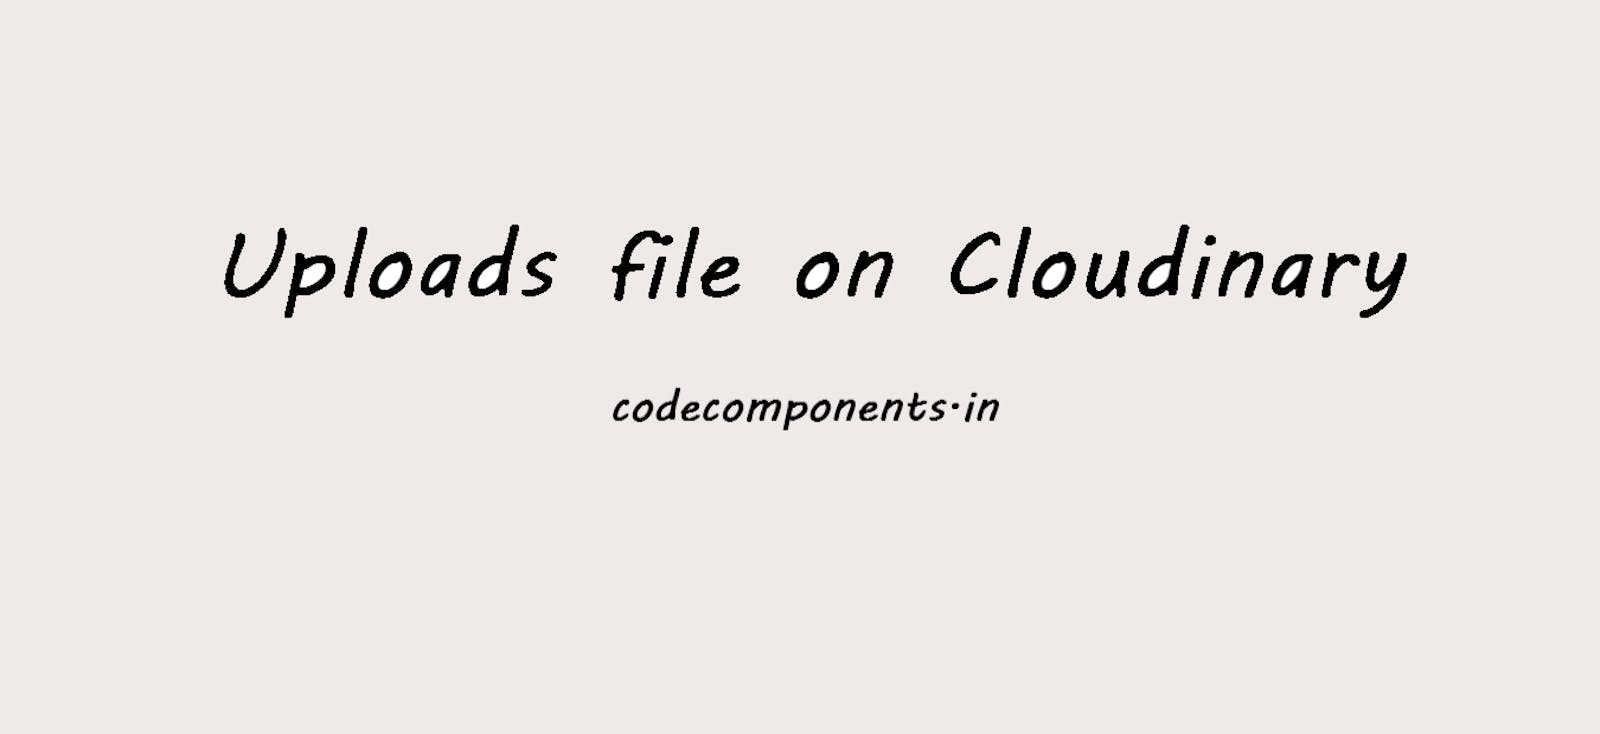 Uploads file on Cloudinary with Node.js: Step-by-Step Guide